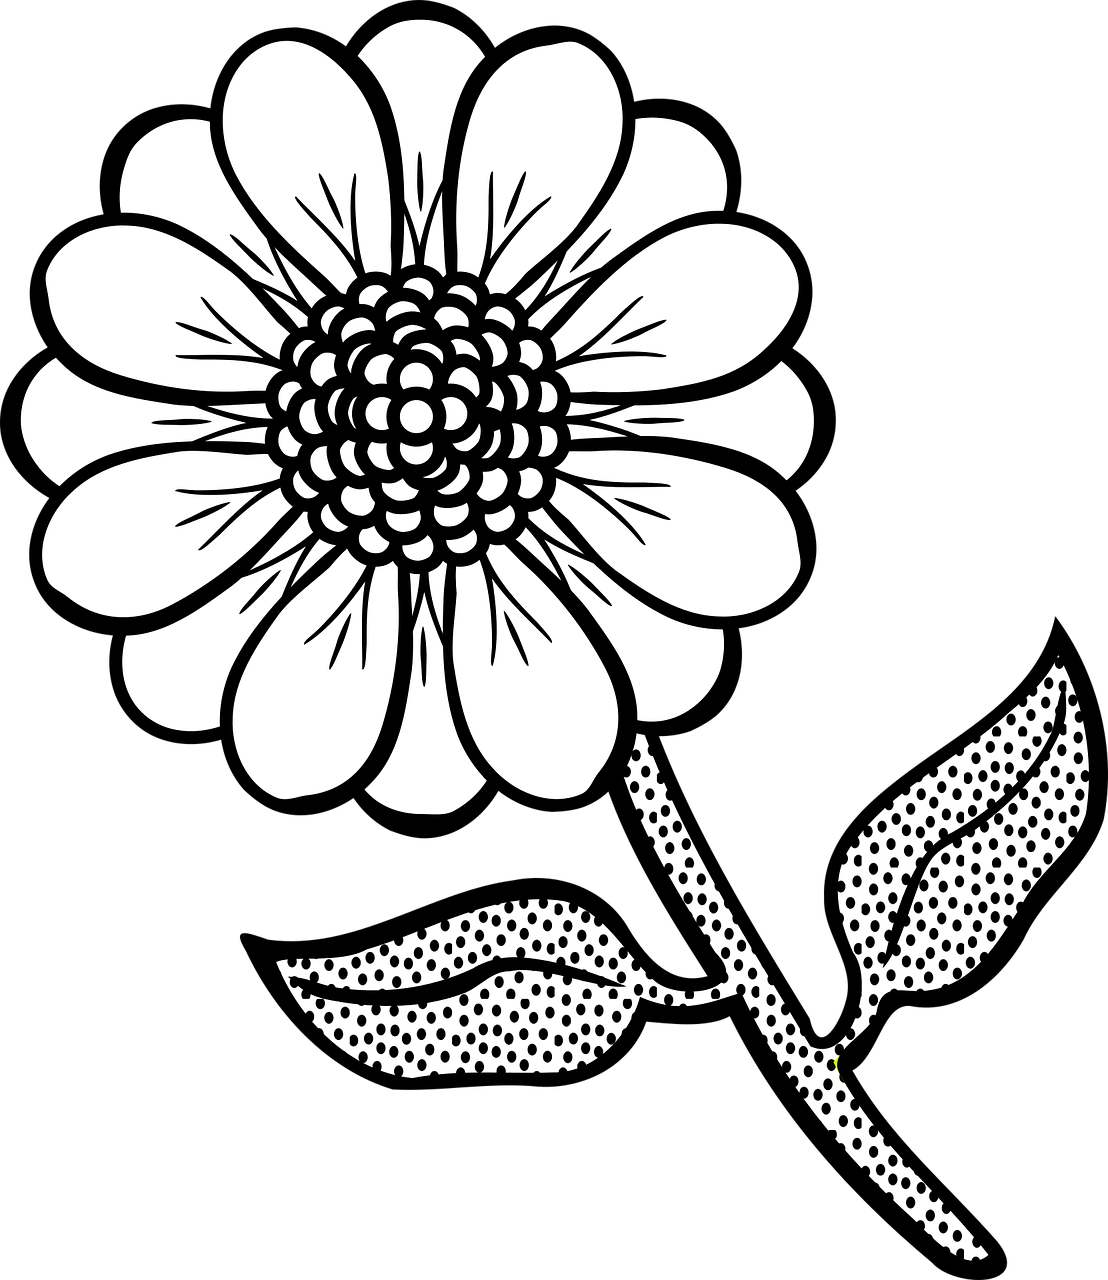 Free printable flower coloring pages 16 pics HOWTODRAW in 1 minute